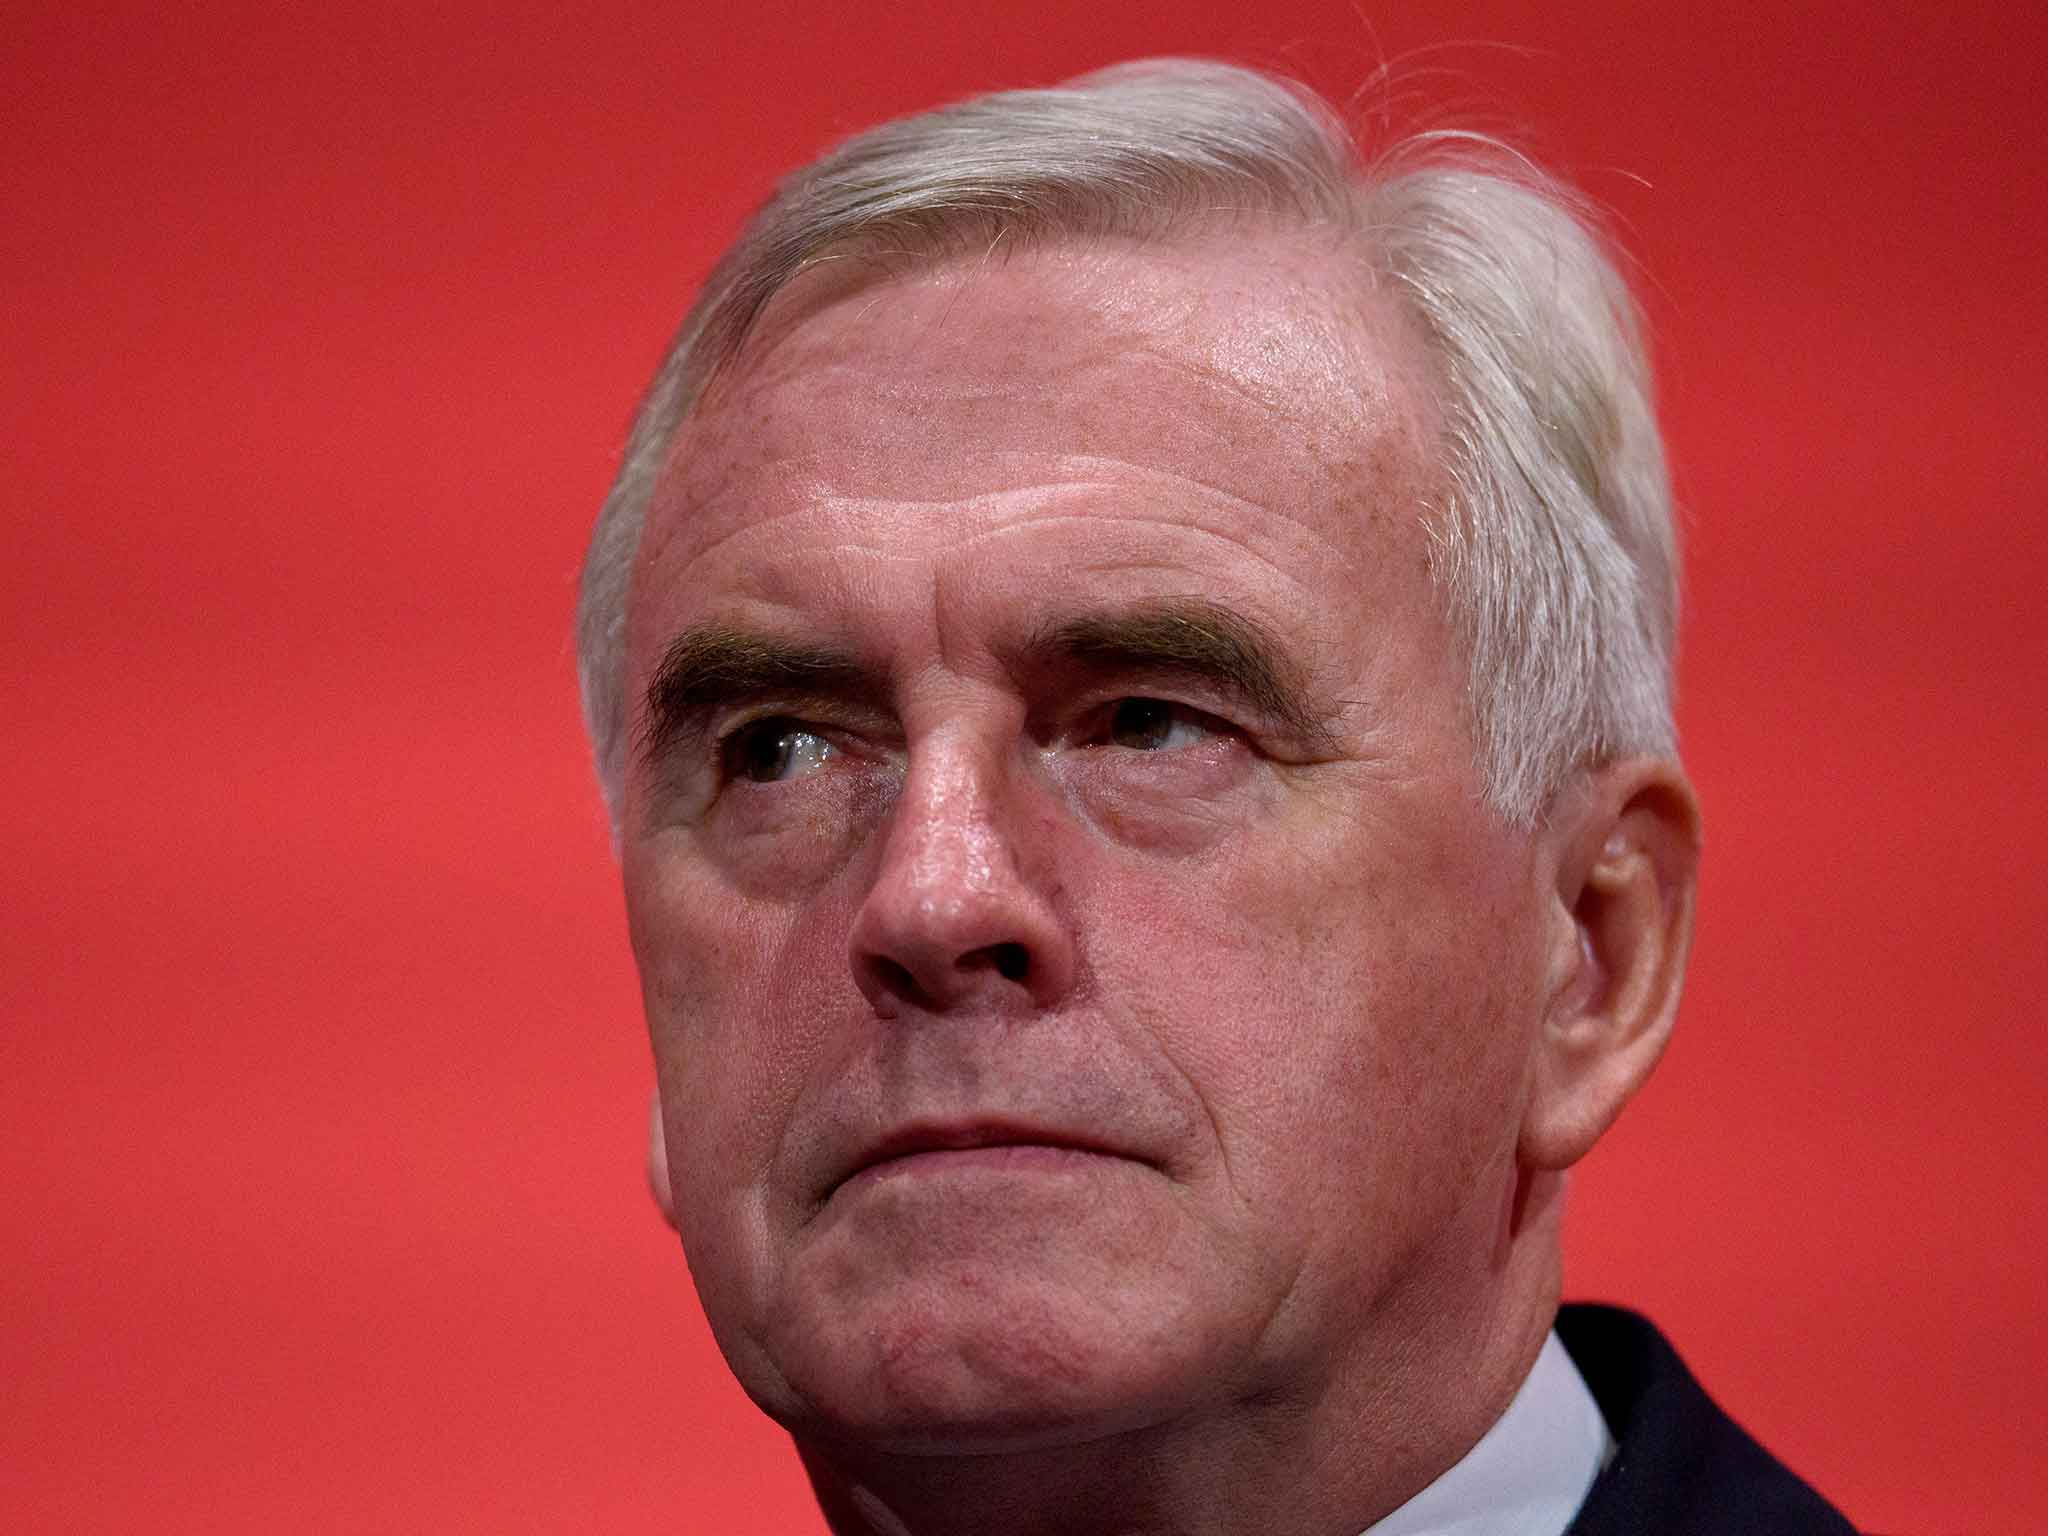 John McDonnell at the Labour party conference in Brighton earlier this year